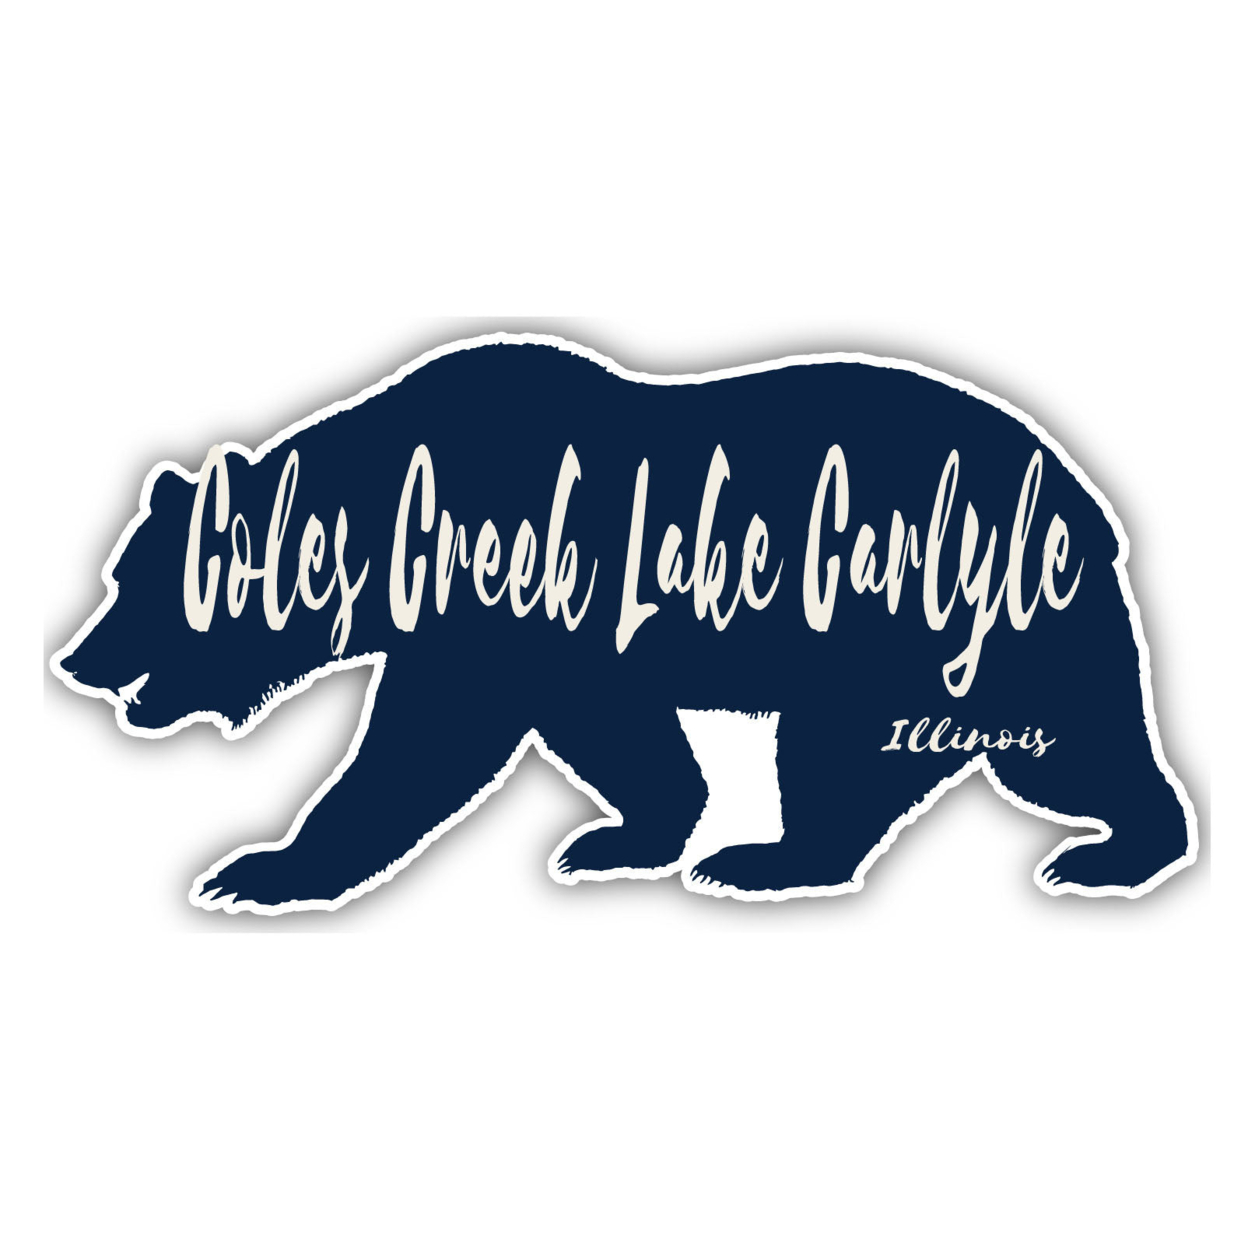 Coles Creek Lake Carlyle Illinois Souvenir Decorative Stickers (Choose Theme And Size) - 4-Pack, 6-Inch, Bear